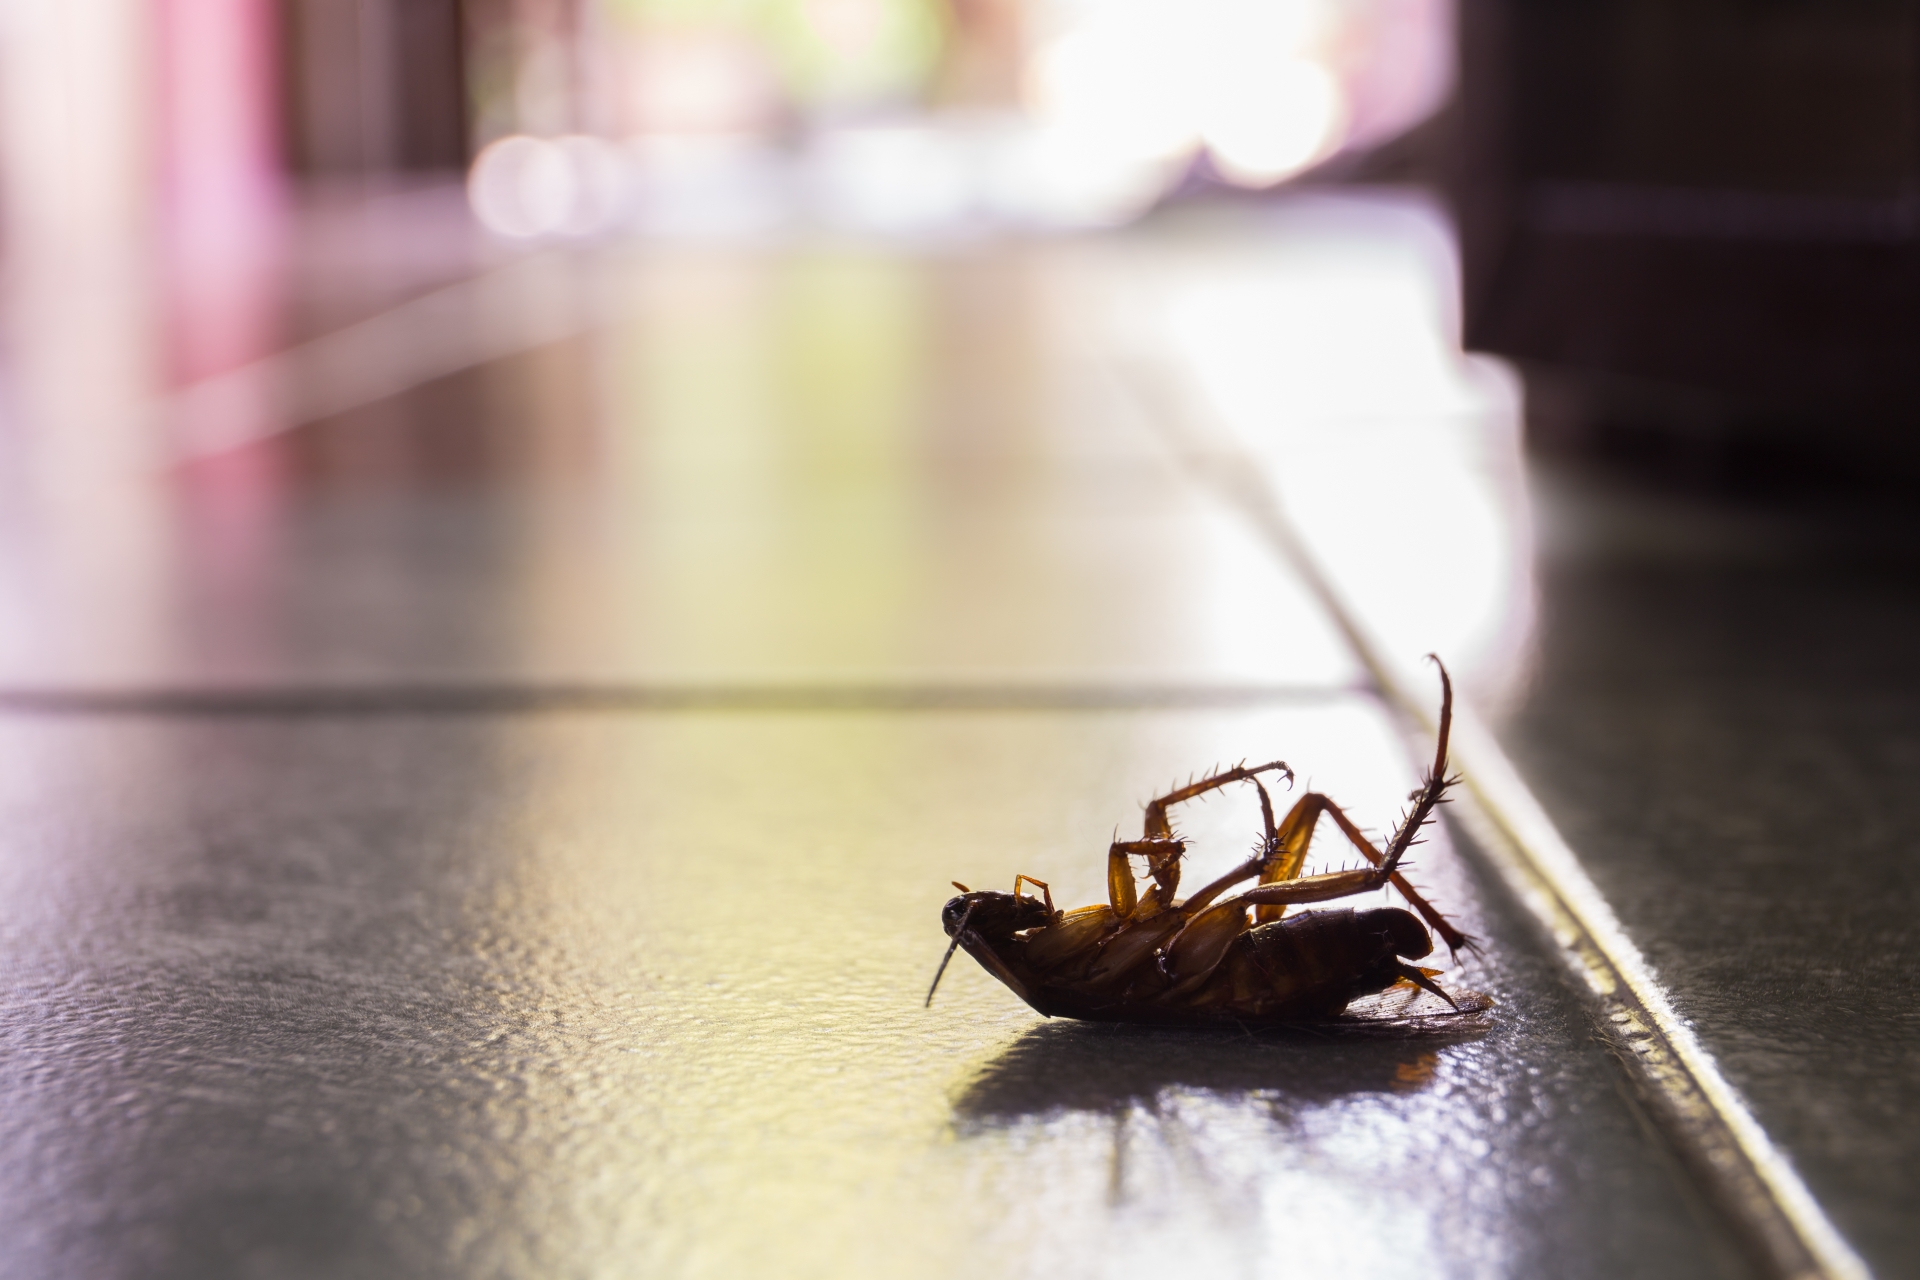 Cockroach Control, Pest Control in Clerkenwell, Finsbury, Barbican, EC1. Call Now 020 8166 9746